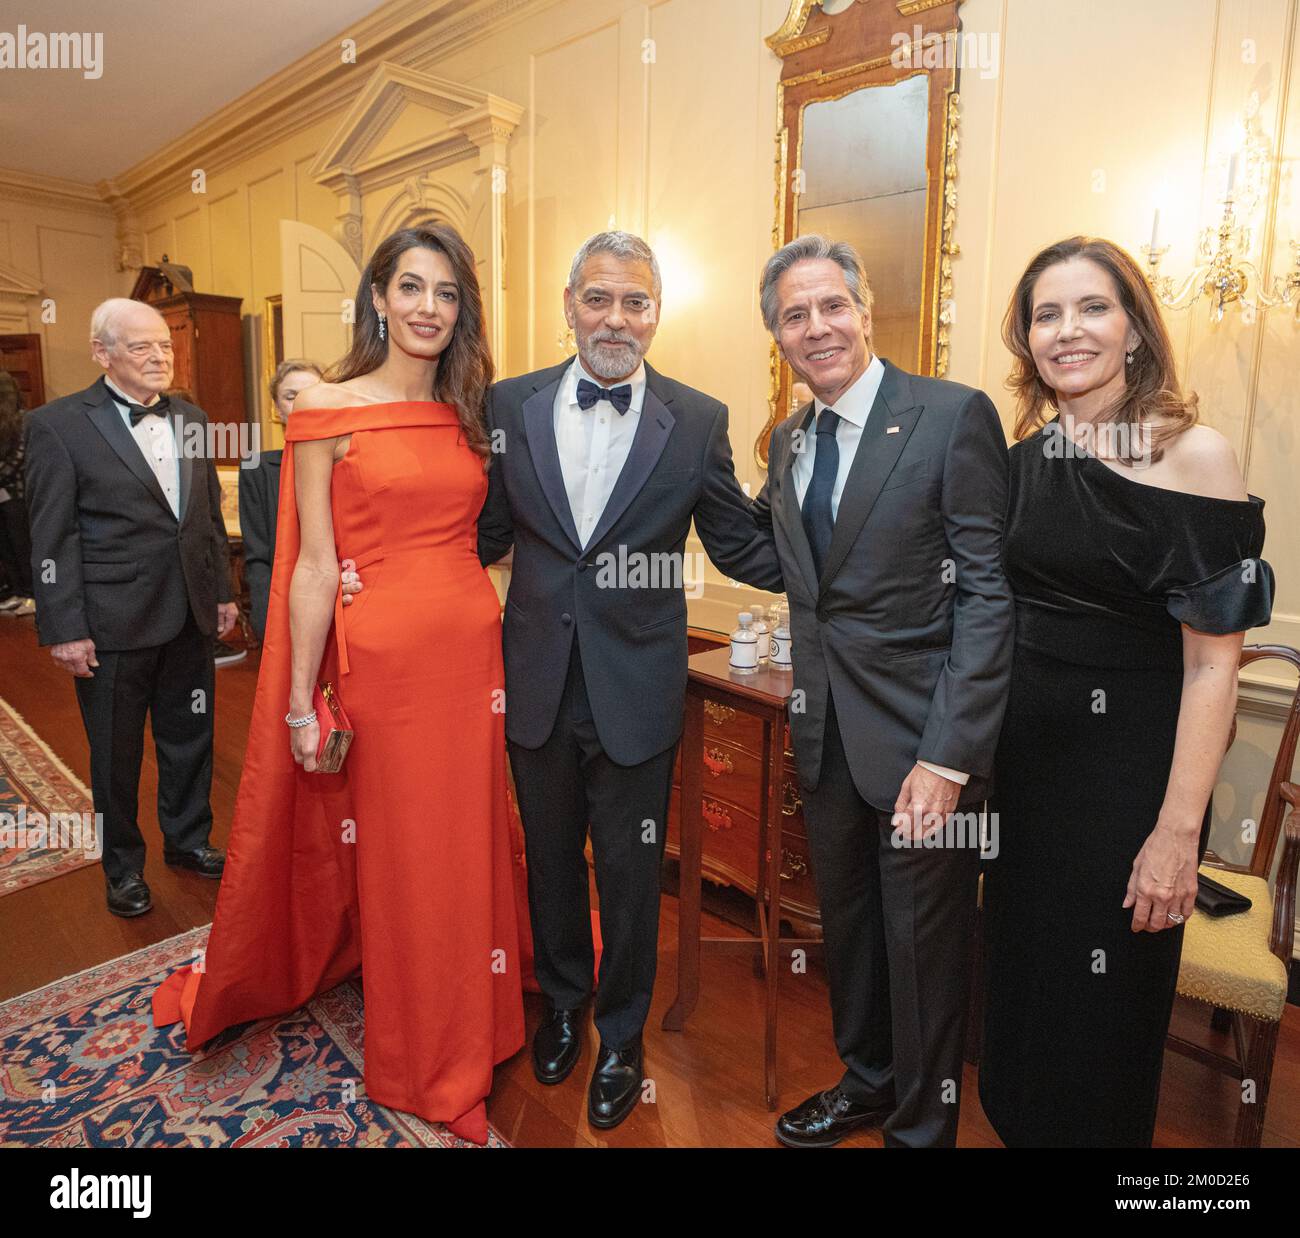 Actor George Clooney and his wife, Amal Clooney at the Kennedy Center Honors Dinner. Secretary of State Antony J. Blinken delivers remarks at the Kennedy Center Honors Dinner in Washington, DC., on December 3, 2022. Stock Photo